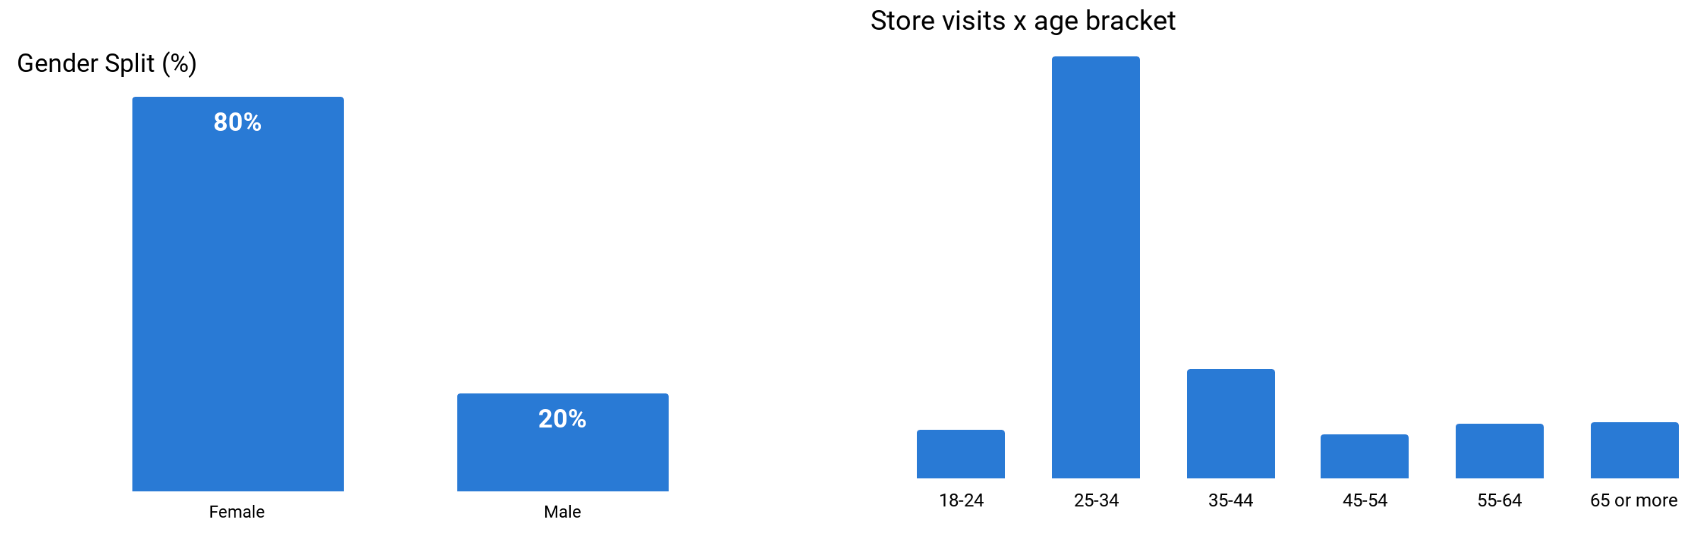 2 Demographic profile of store visits